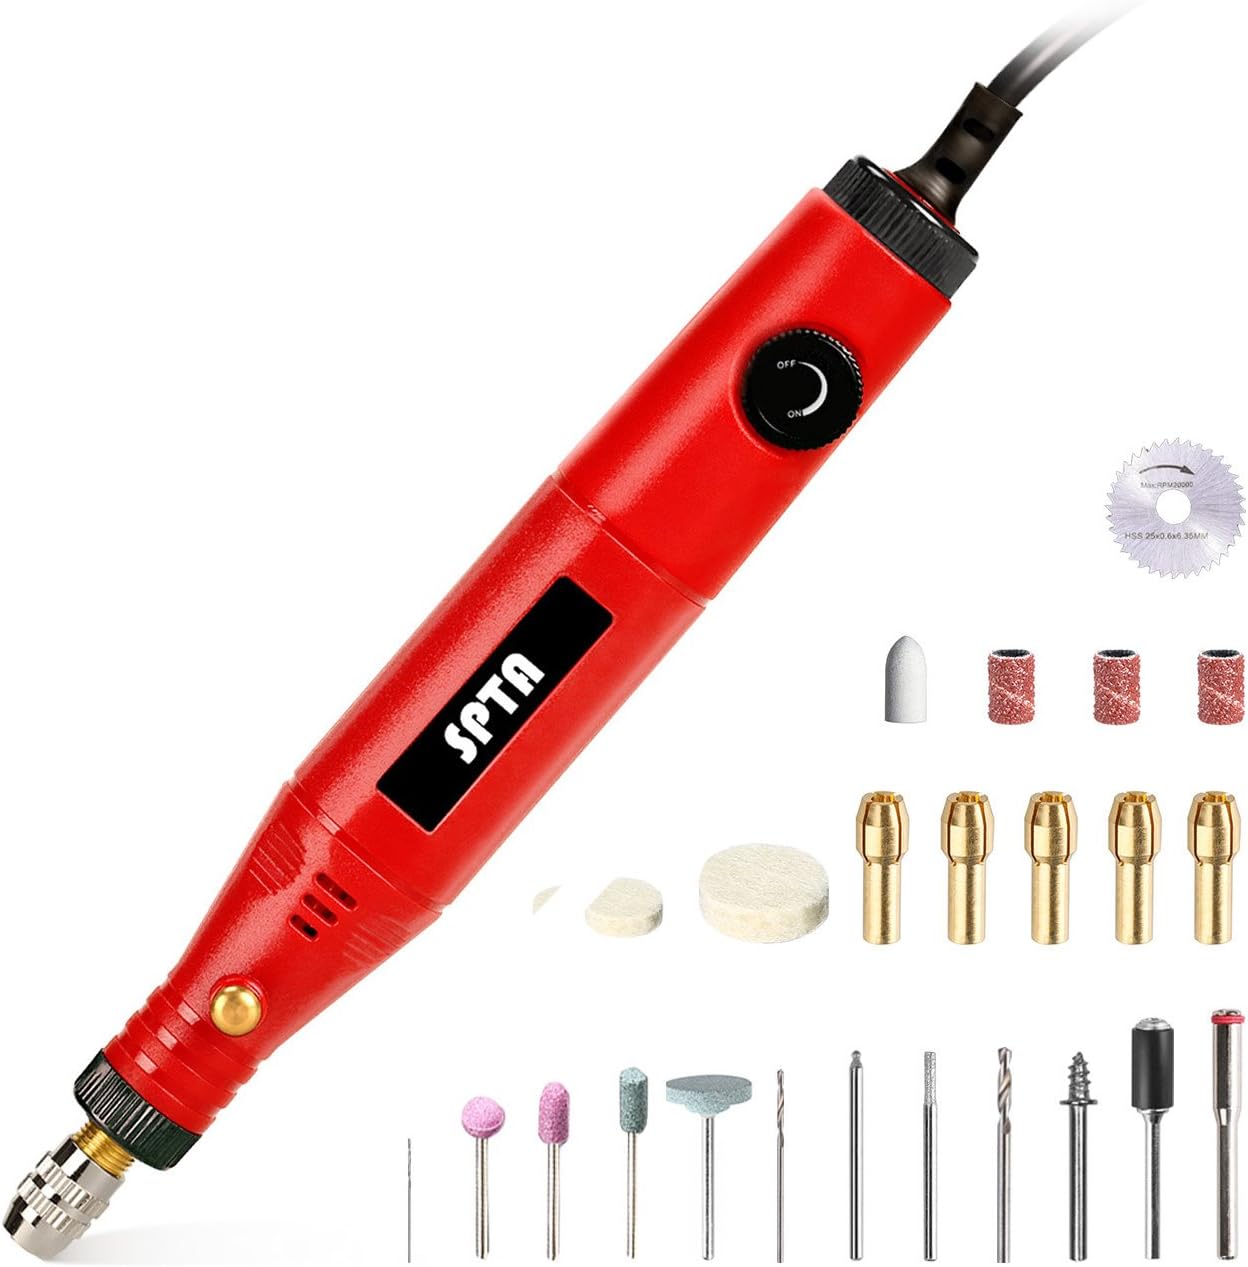 SPTA Electric Rotary Tool Kit, Mini Electric Grinder Set/Nail Drill Mini  Handle Electric Drill Grinding Engraving Pen Milling Trimm